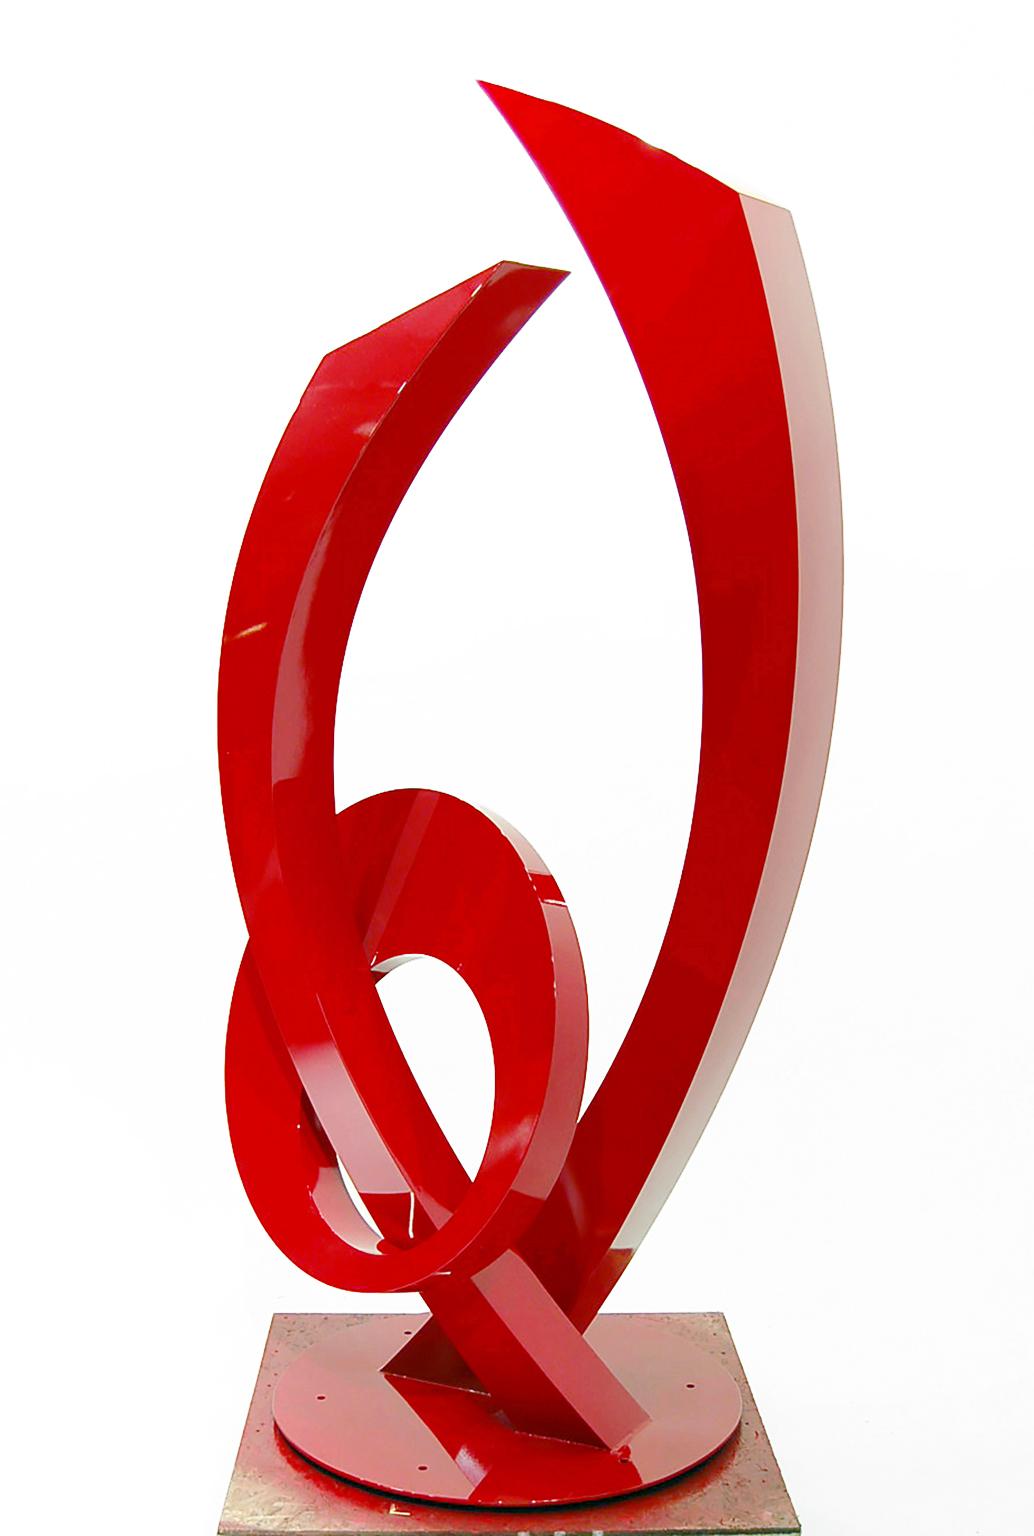 "Anniversary", Large Minimalist Abstract Stainless Steel Sculpture in Red